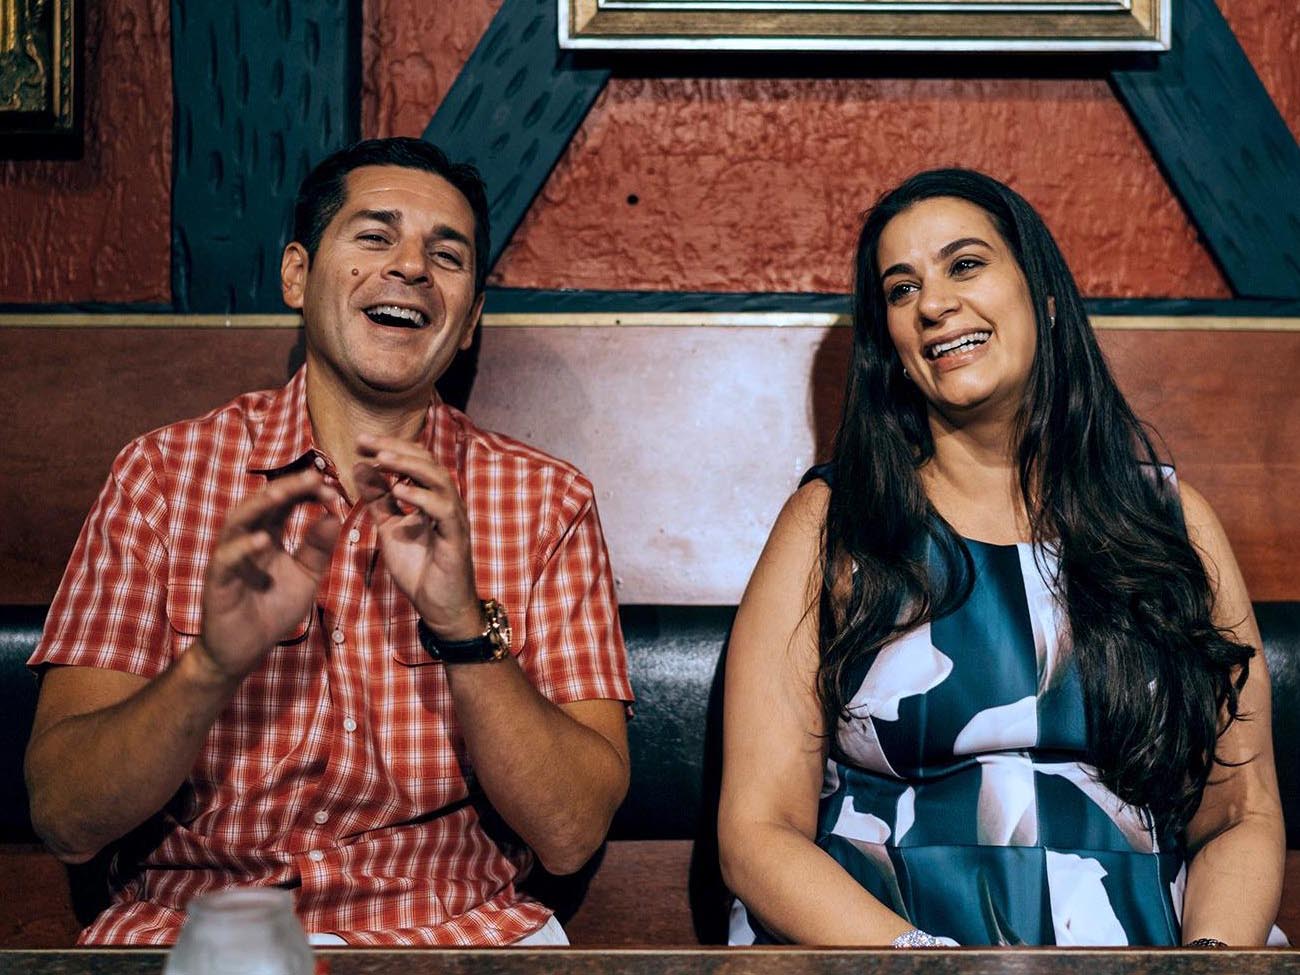 Dean Obeidallah, left, and Maysoon Zayid co-founded the Arab American Comedy Festival. Courtesy photo